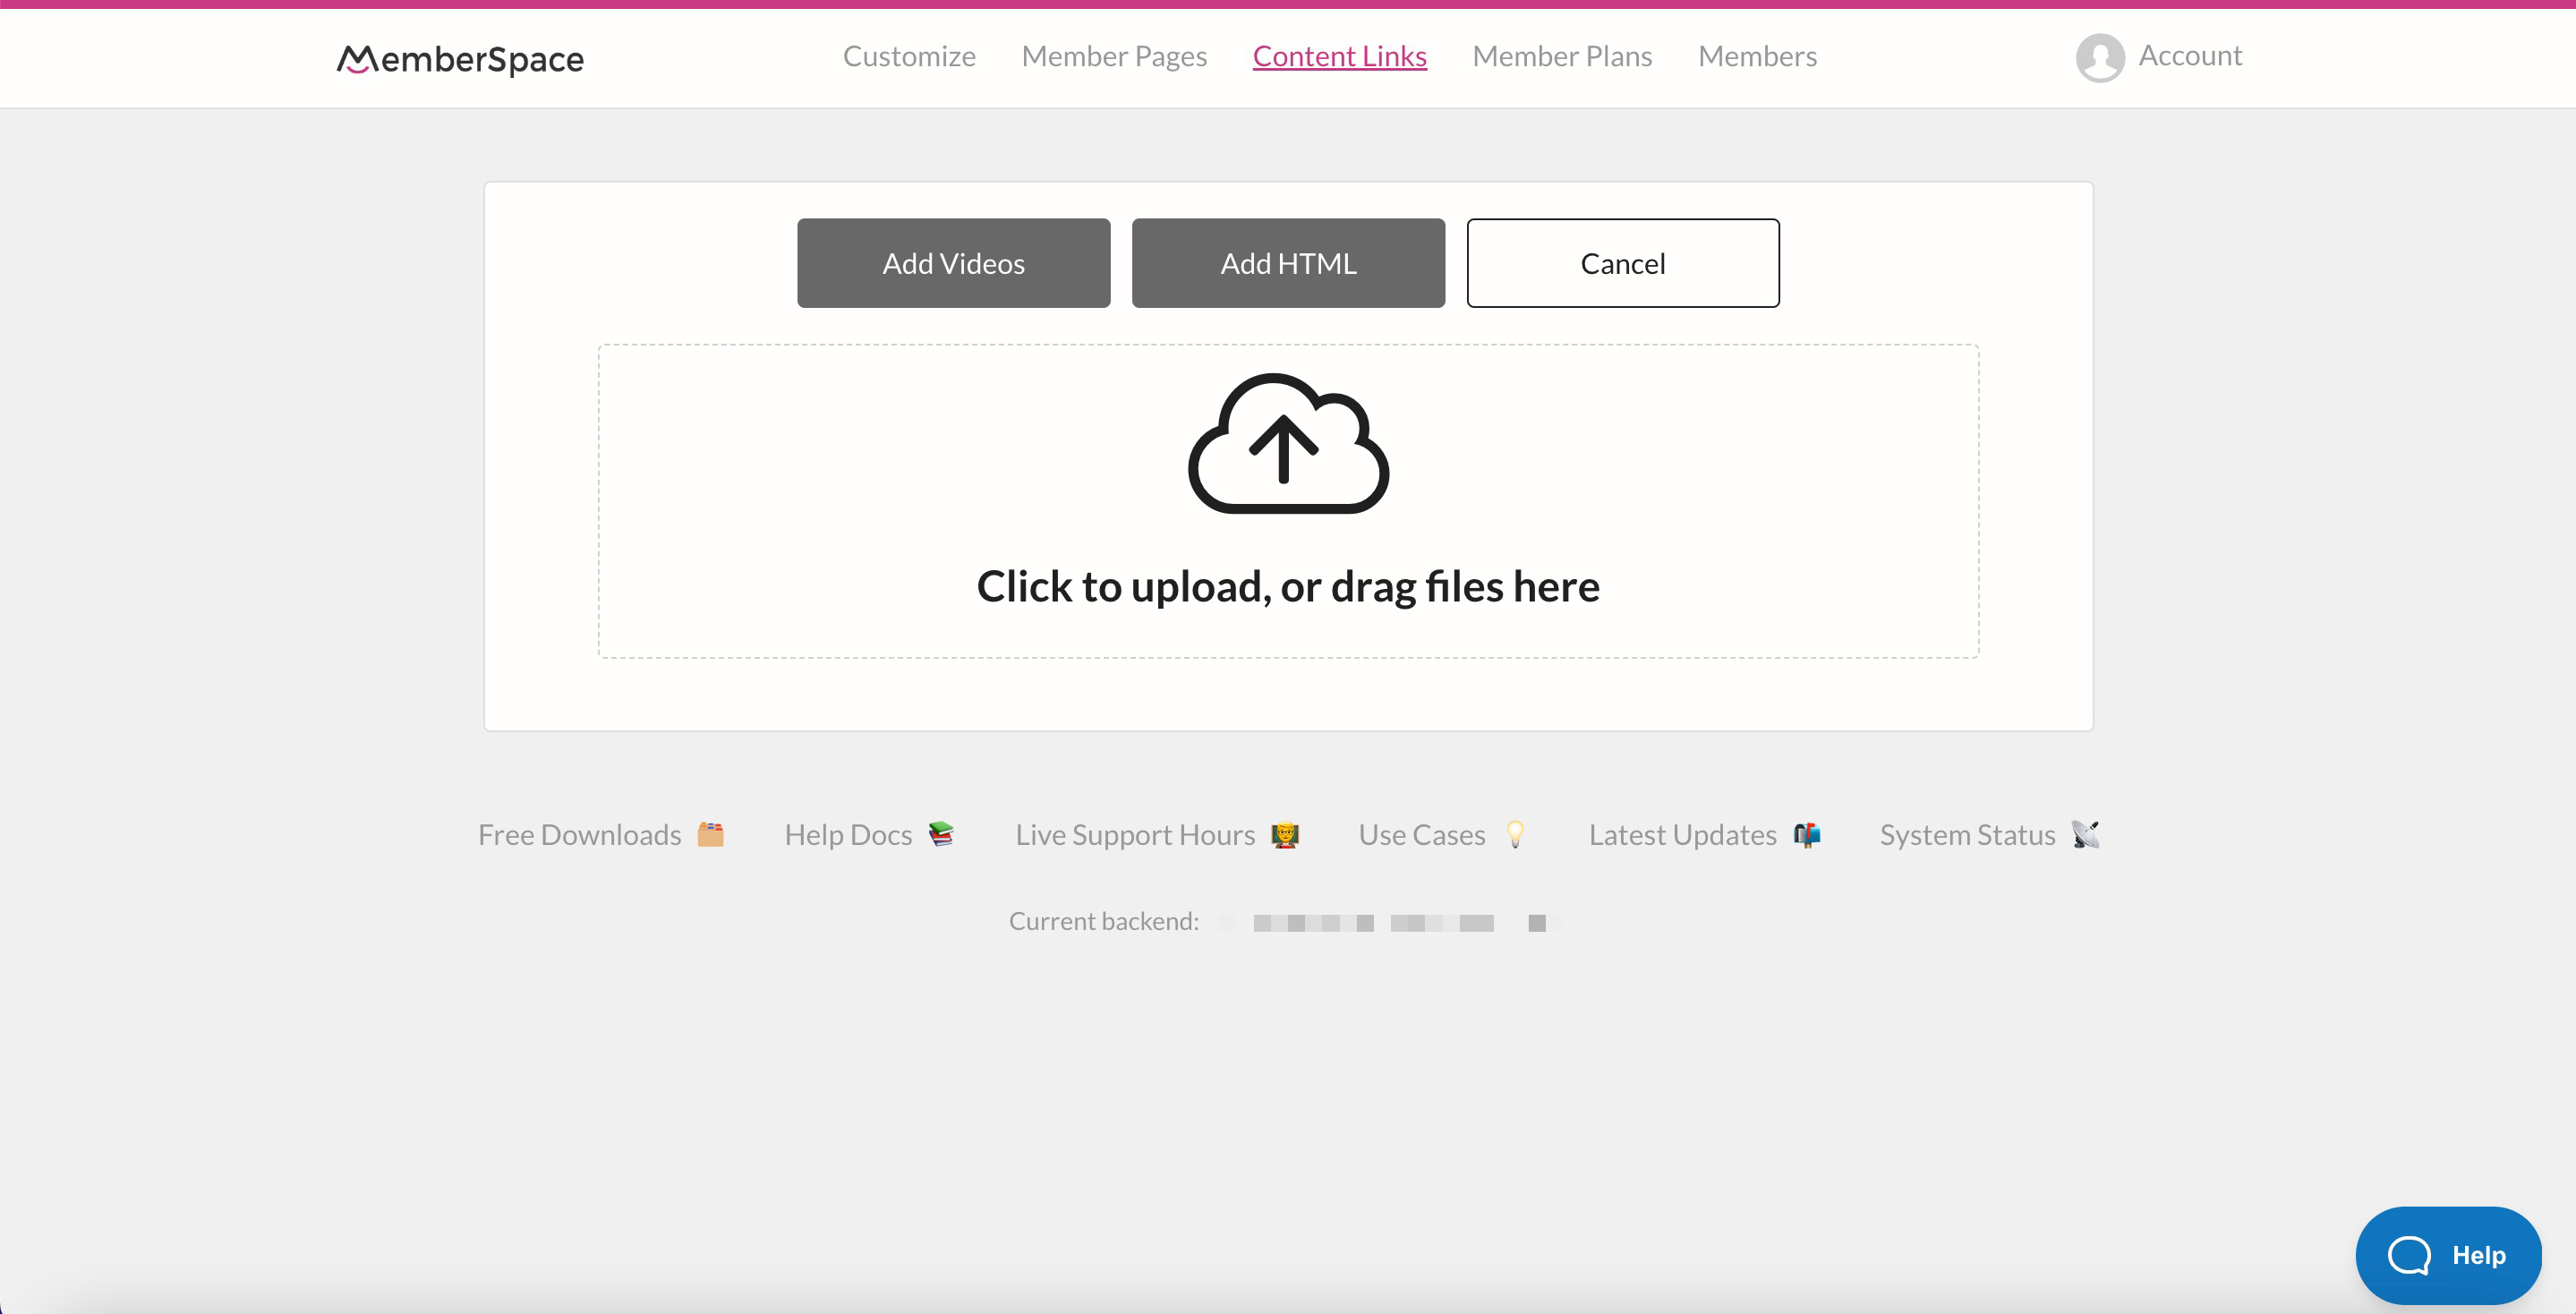 Drag and drop in-person event files onto the screen to protect them